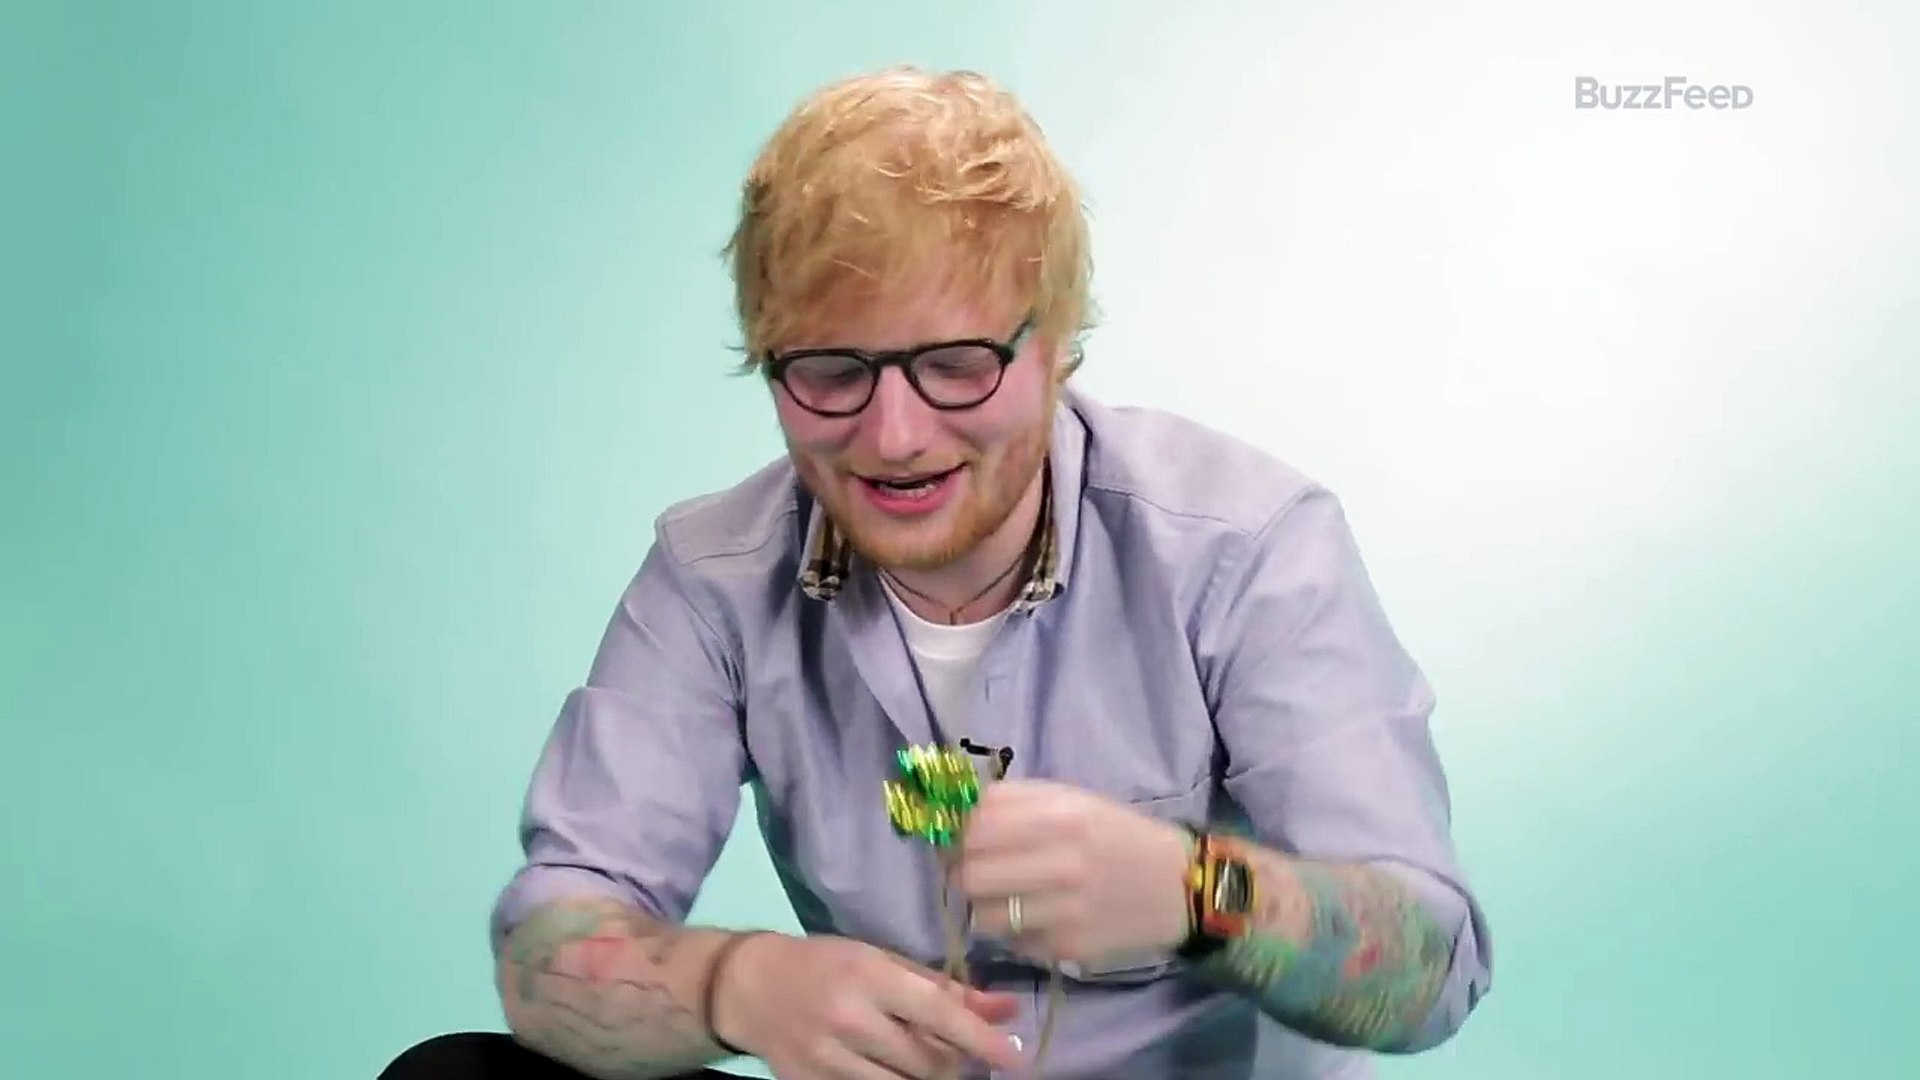 Ed Sheeran Plays With Kittens While Answering Fan Questions